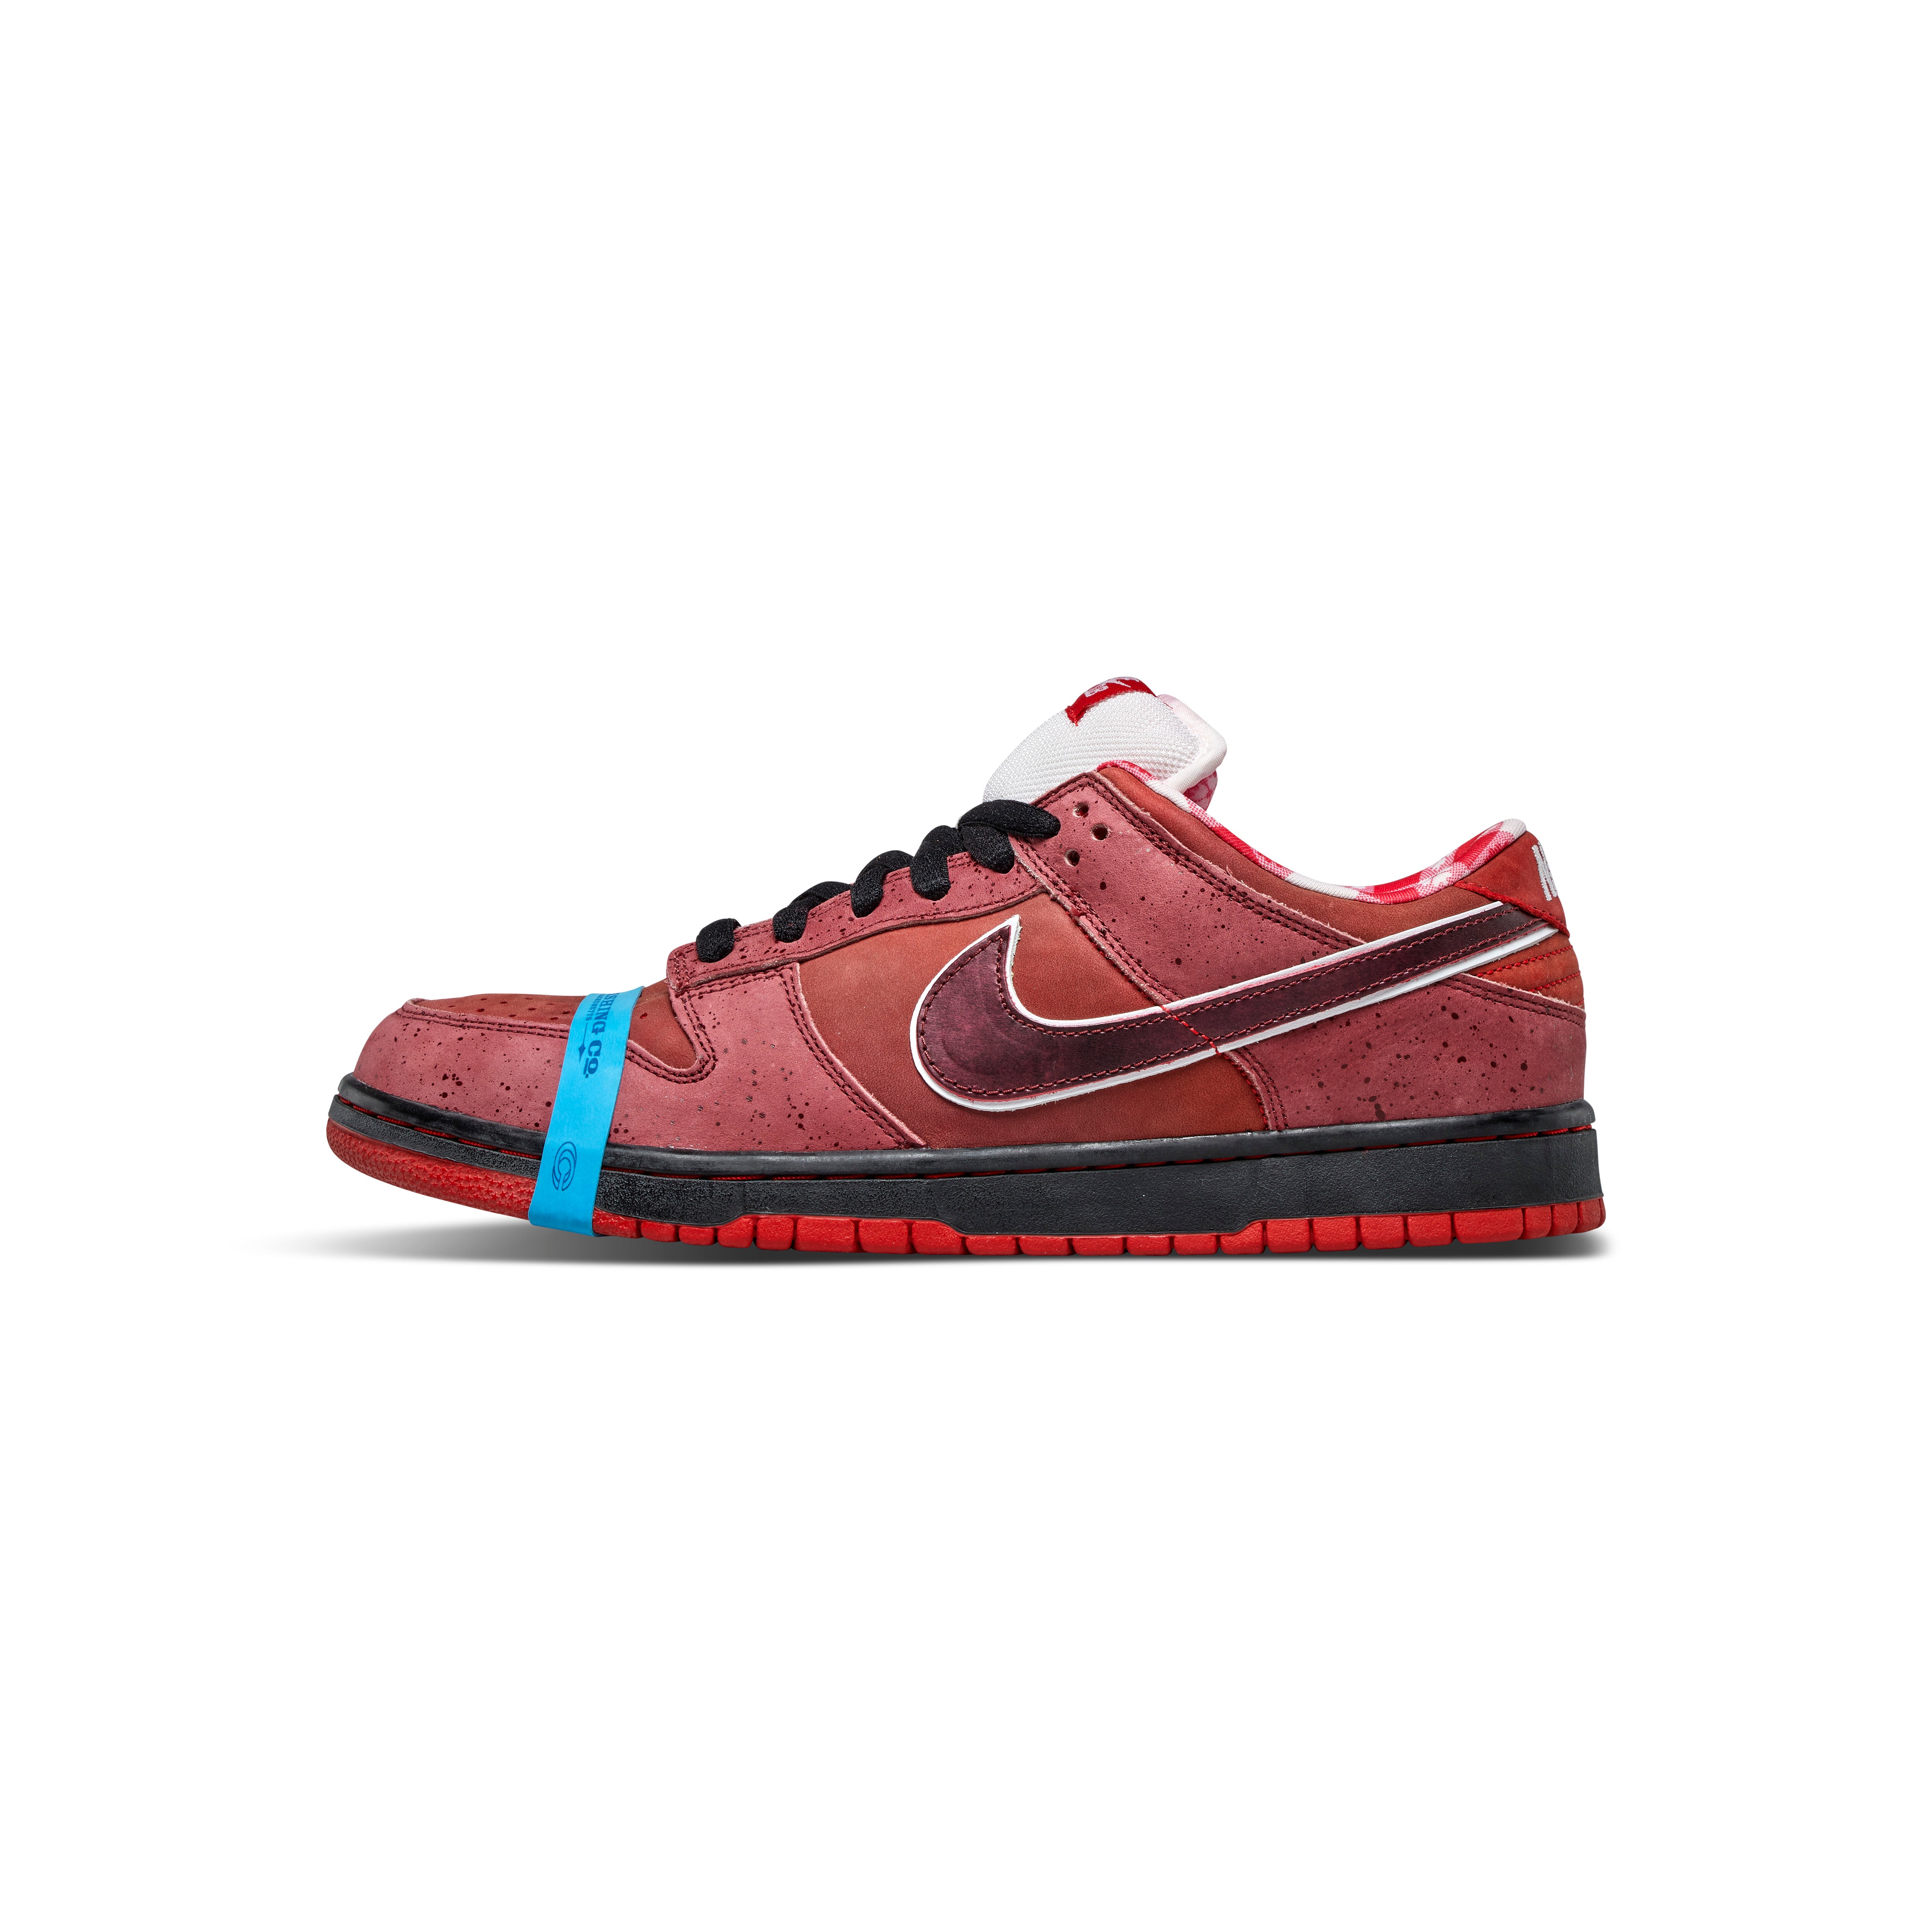 Dunk SB Low Red Lobster (Special Box)